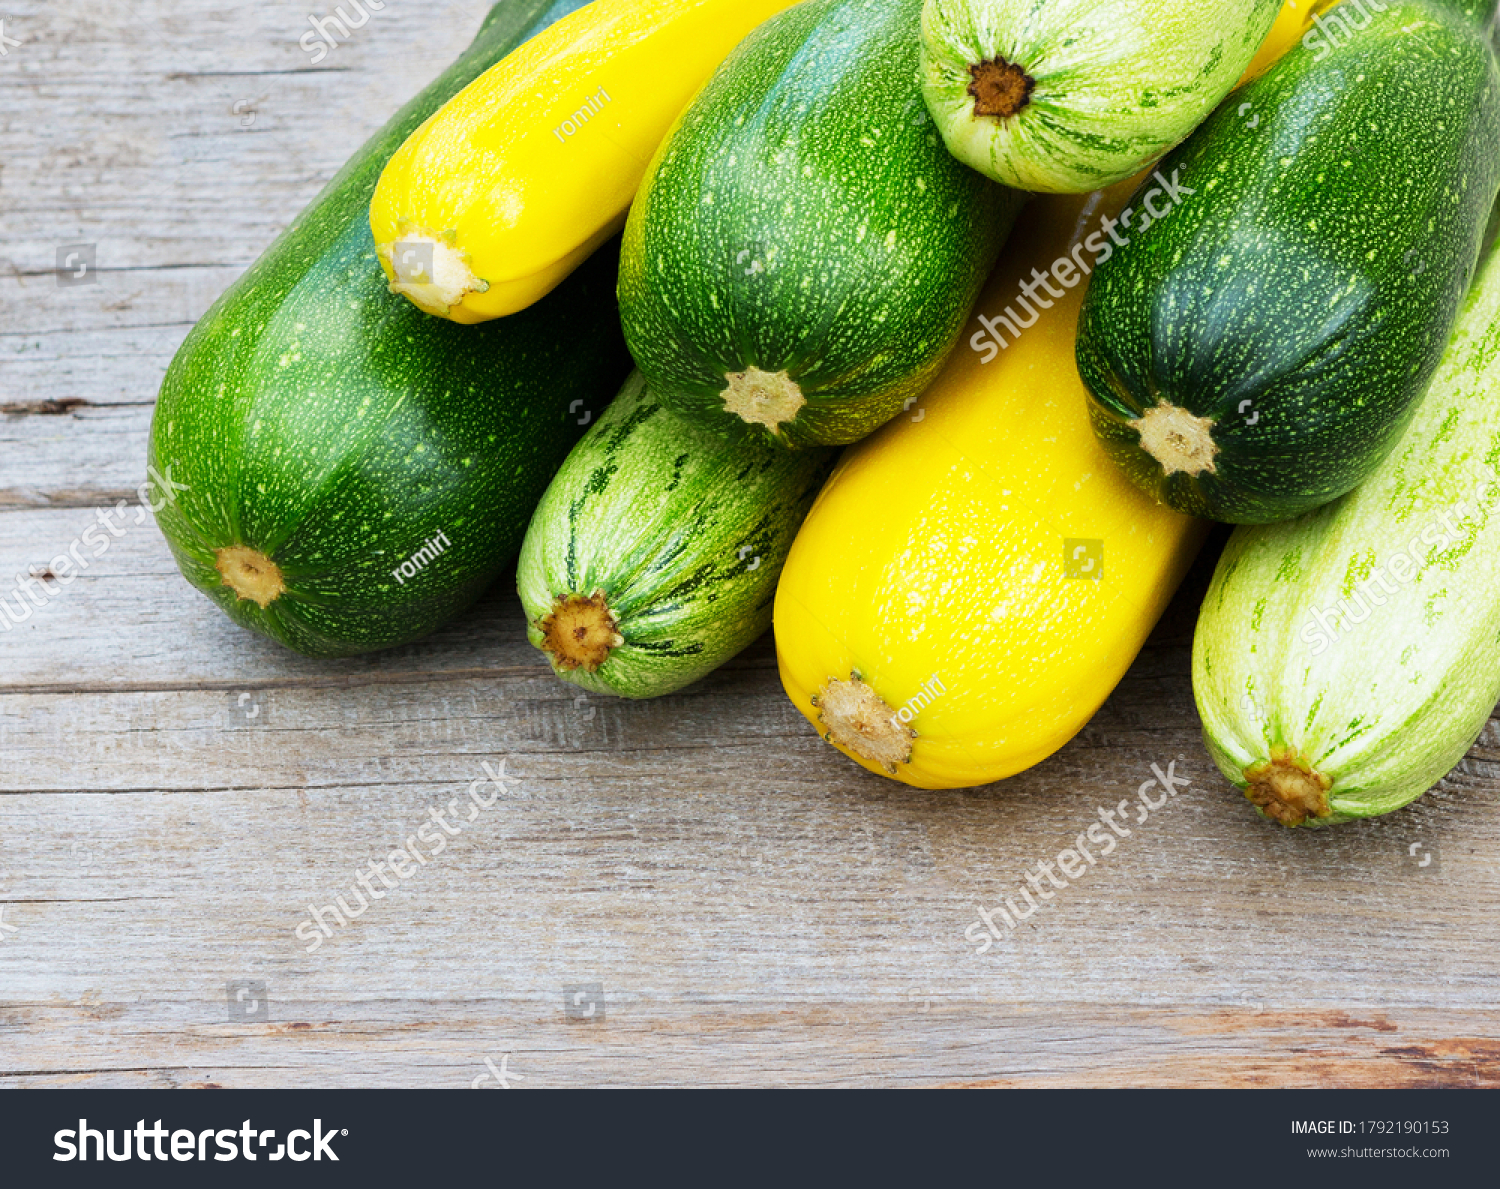 Zucchini on wooden background. Yellow and green zucchini. Vegetable marrow courgette or zucchini. Harvest courgette organic ingredient. #1792190153